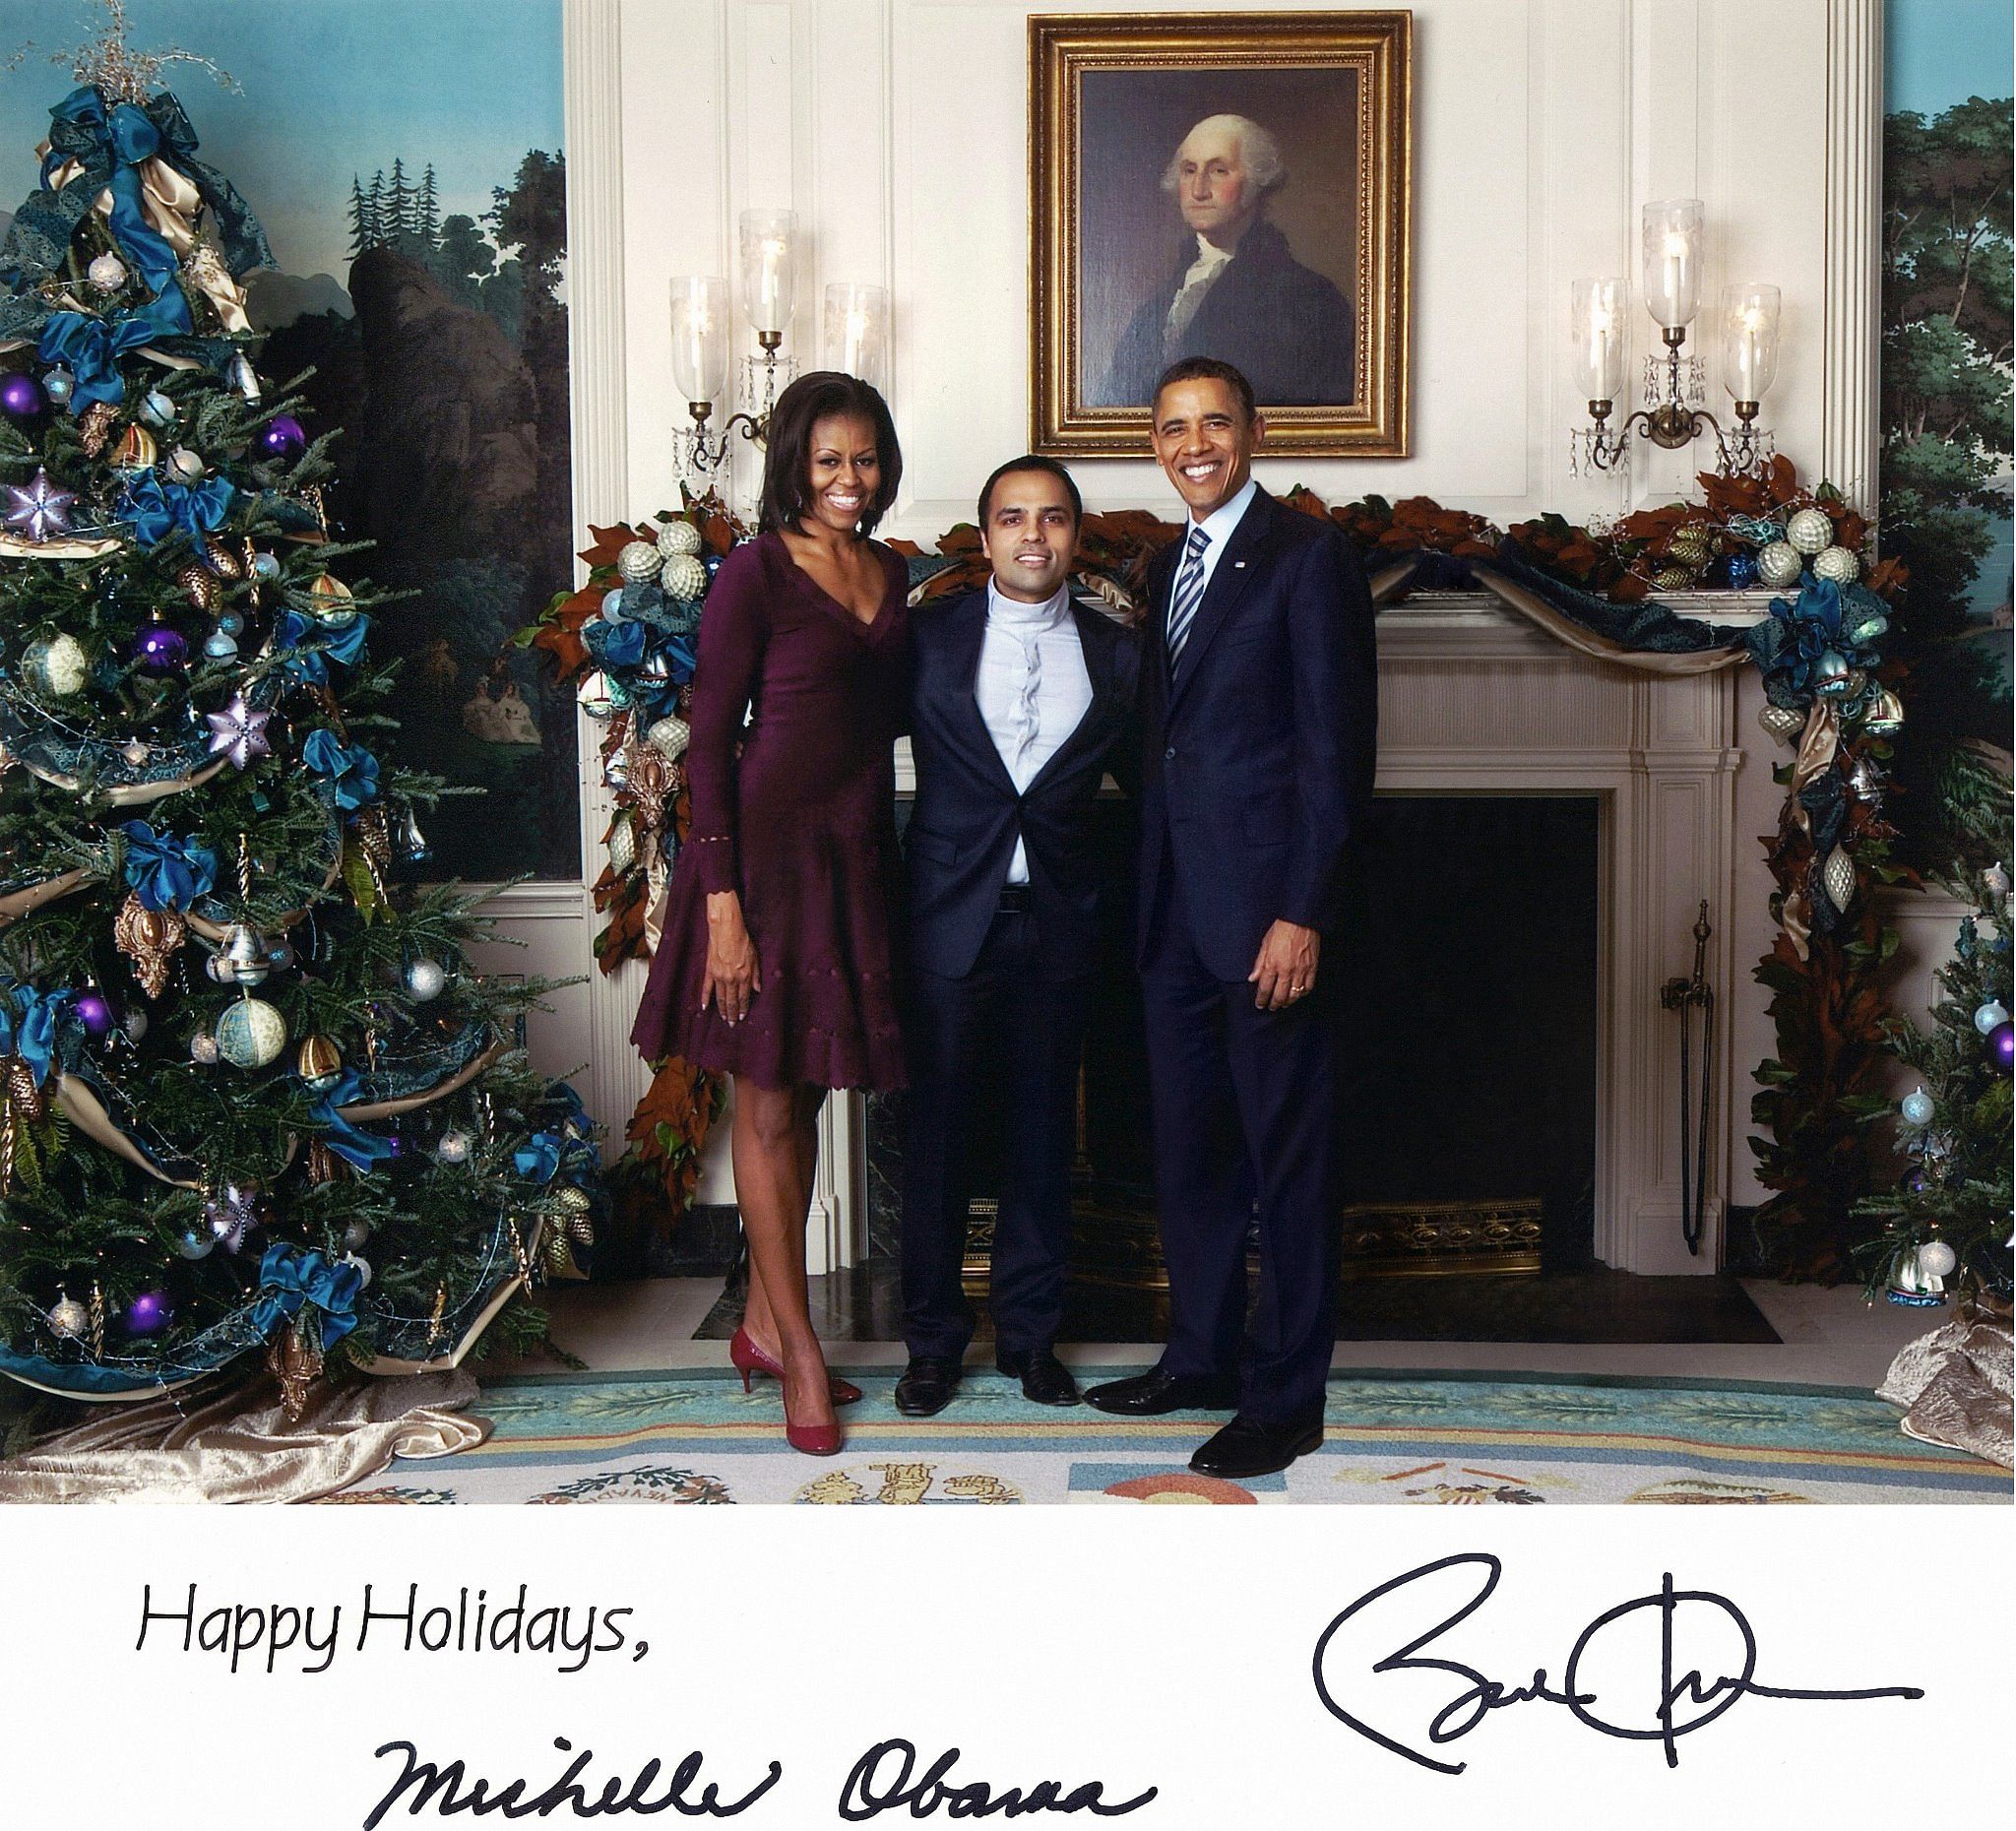 Chahal with the Obamas| Gurbaksh Chahal, Facebook